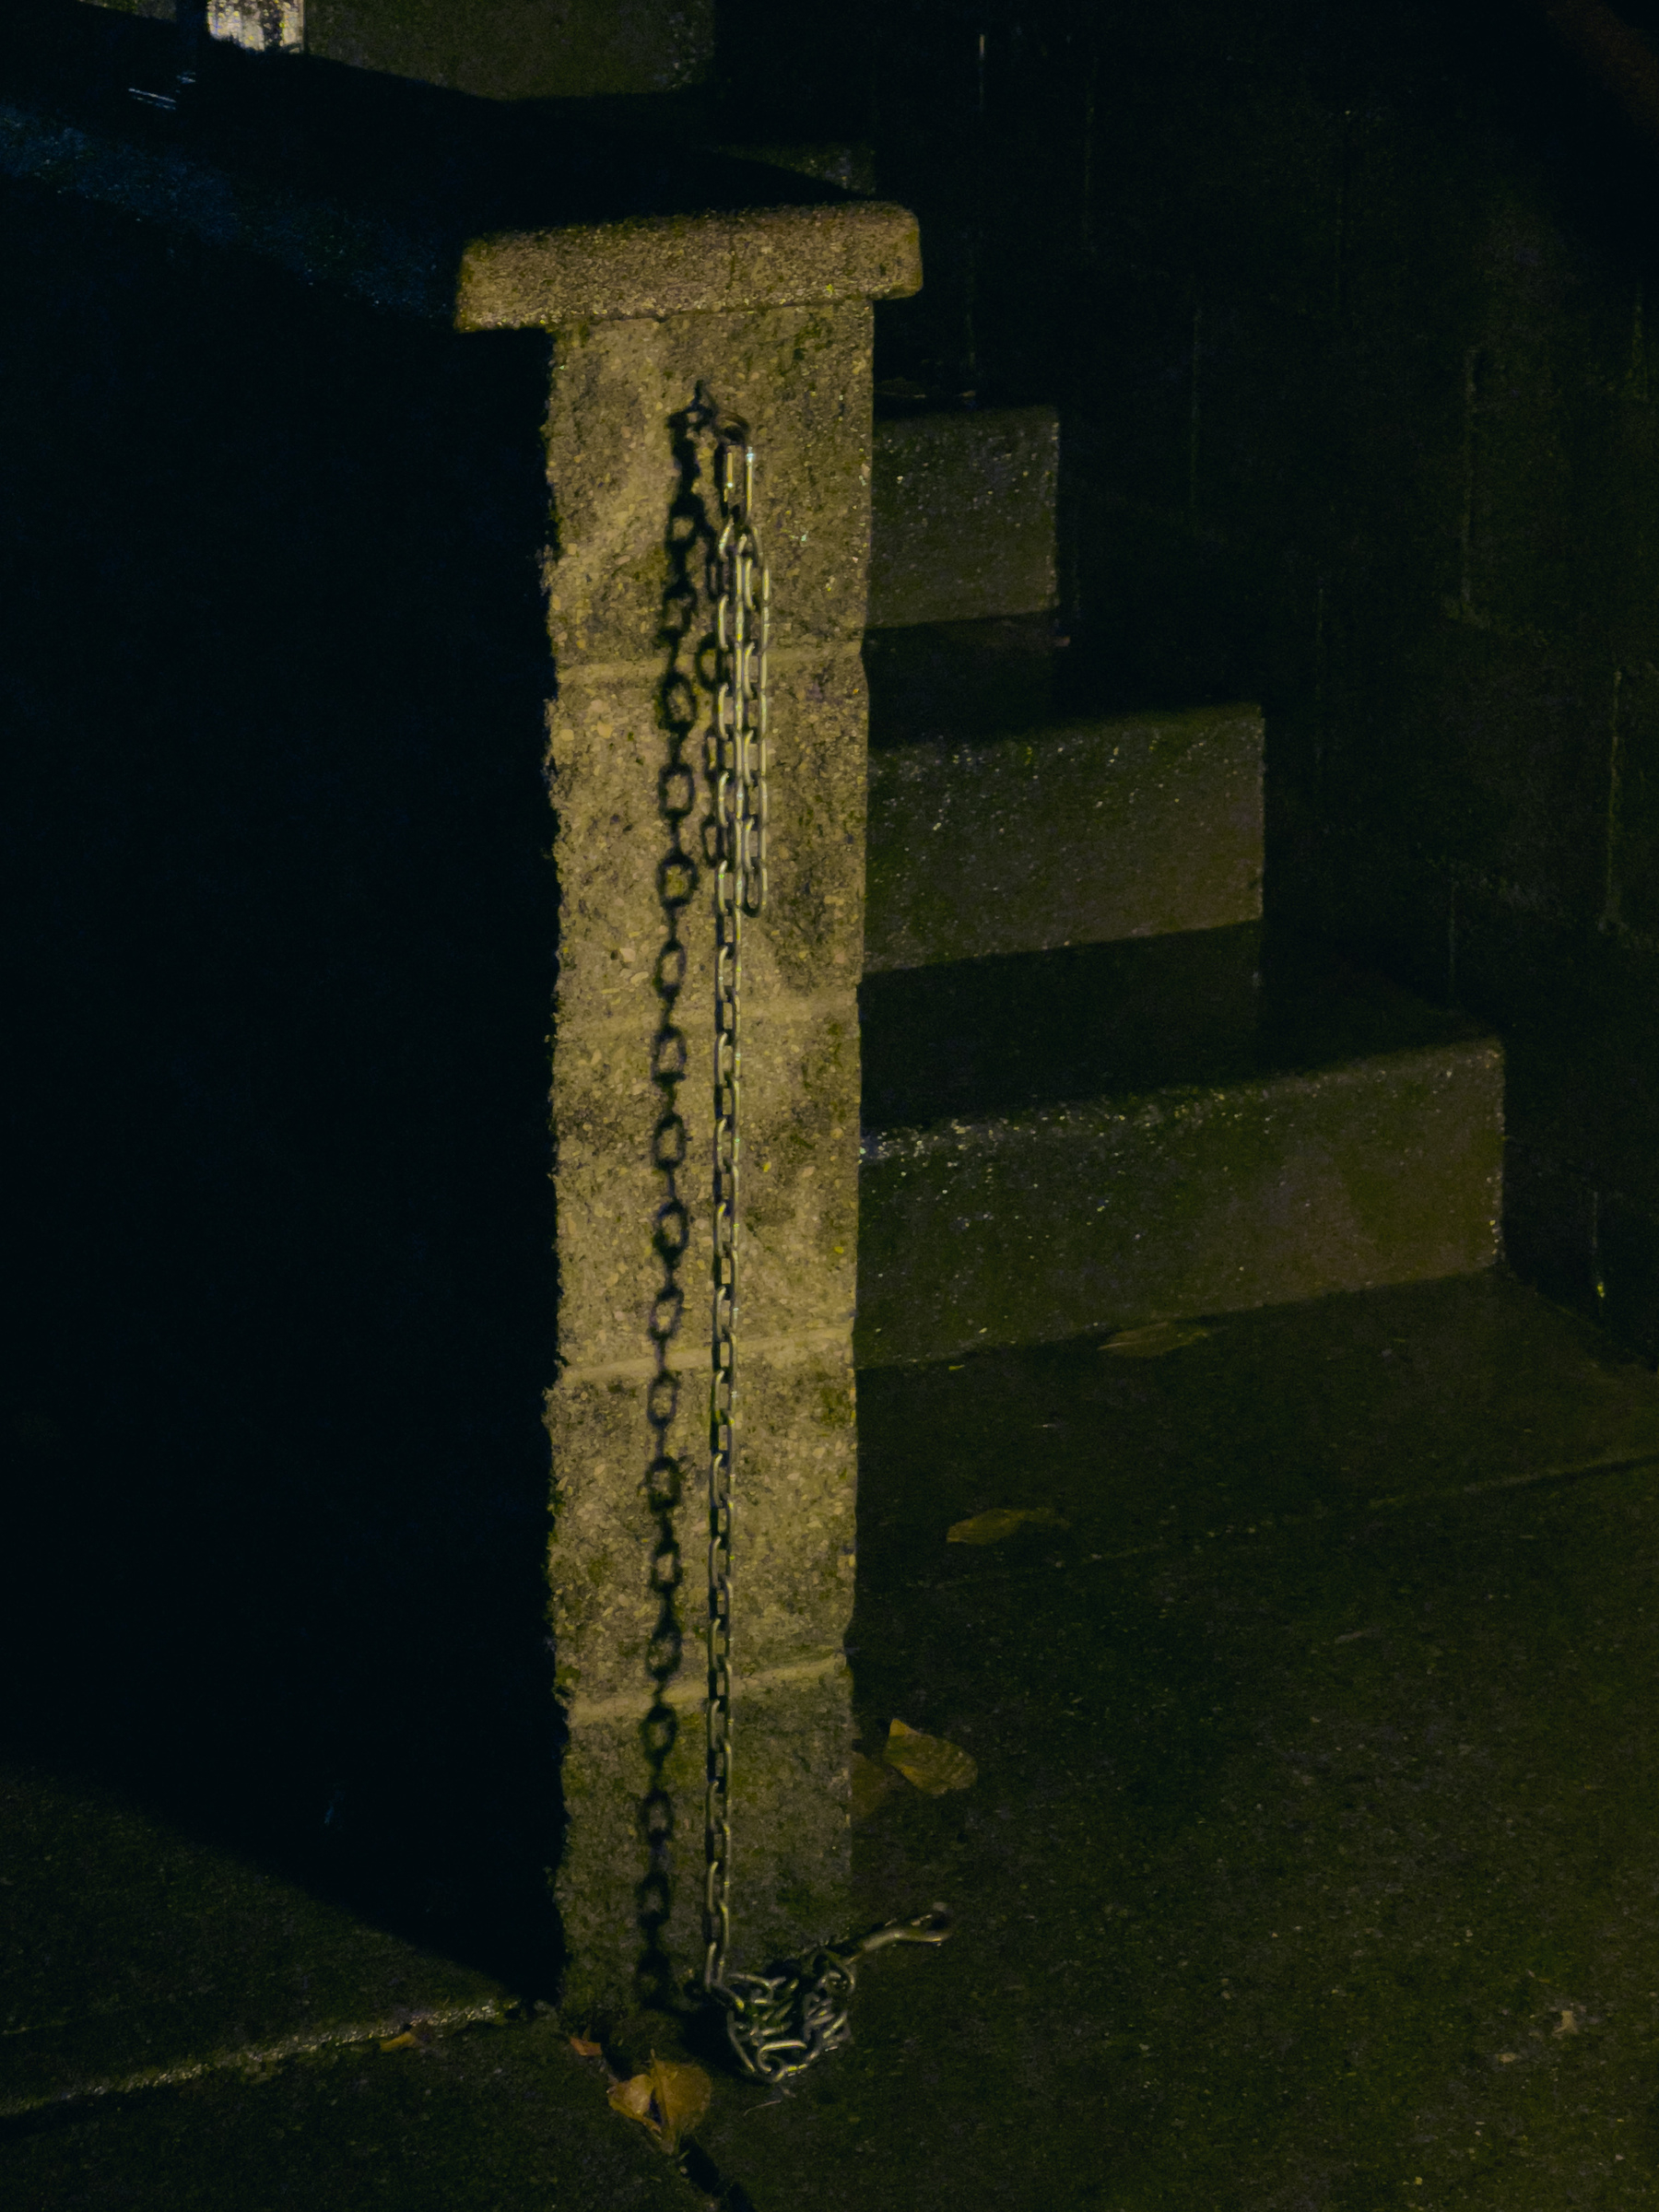 End of low height wall with chain dangling from top to pavement below, concrete stairs in shadow beyond, scene illuminated by unseen security light to the right 